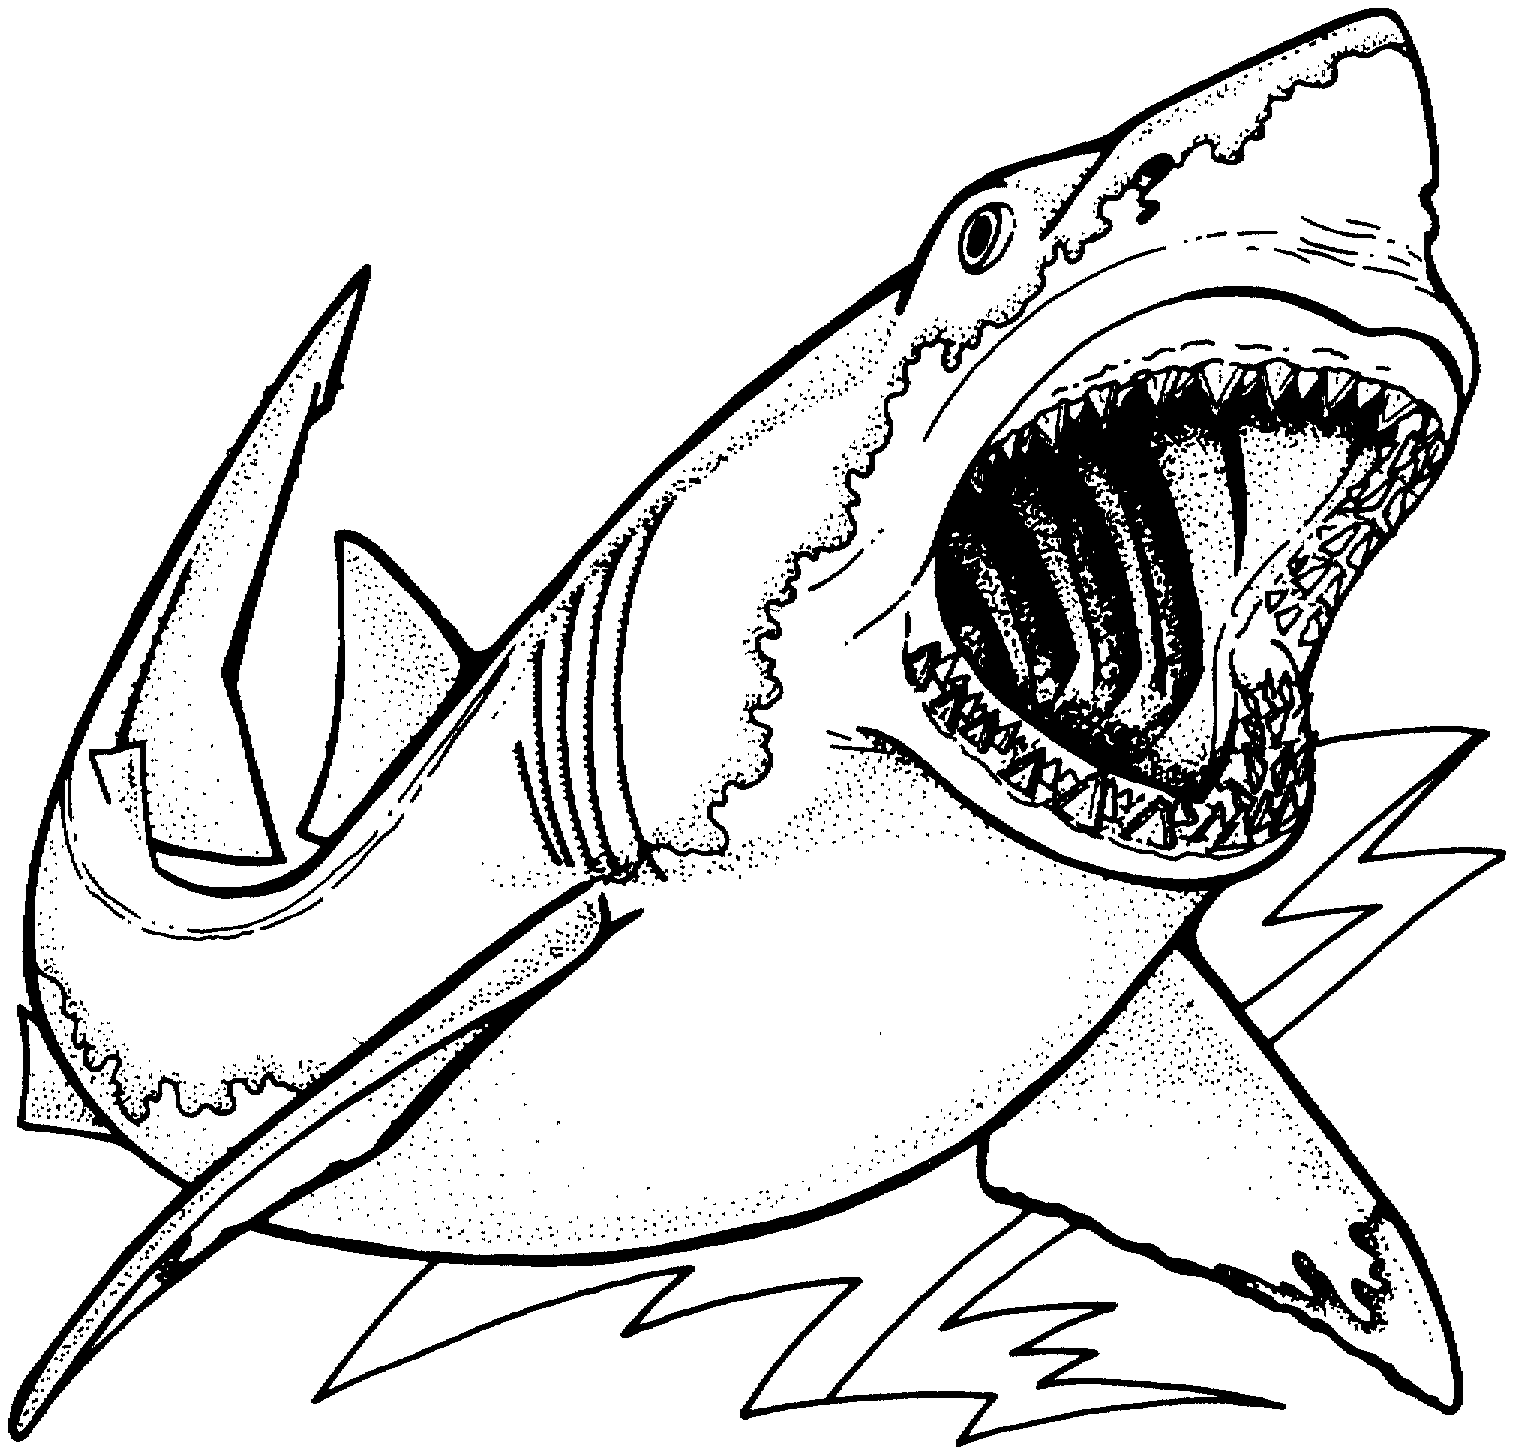 Shark Coloring Pages   Clipart Panda   Free Clipart Images